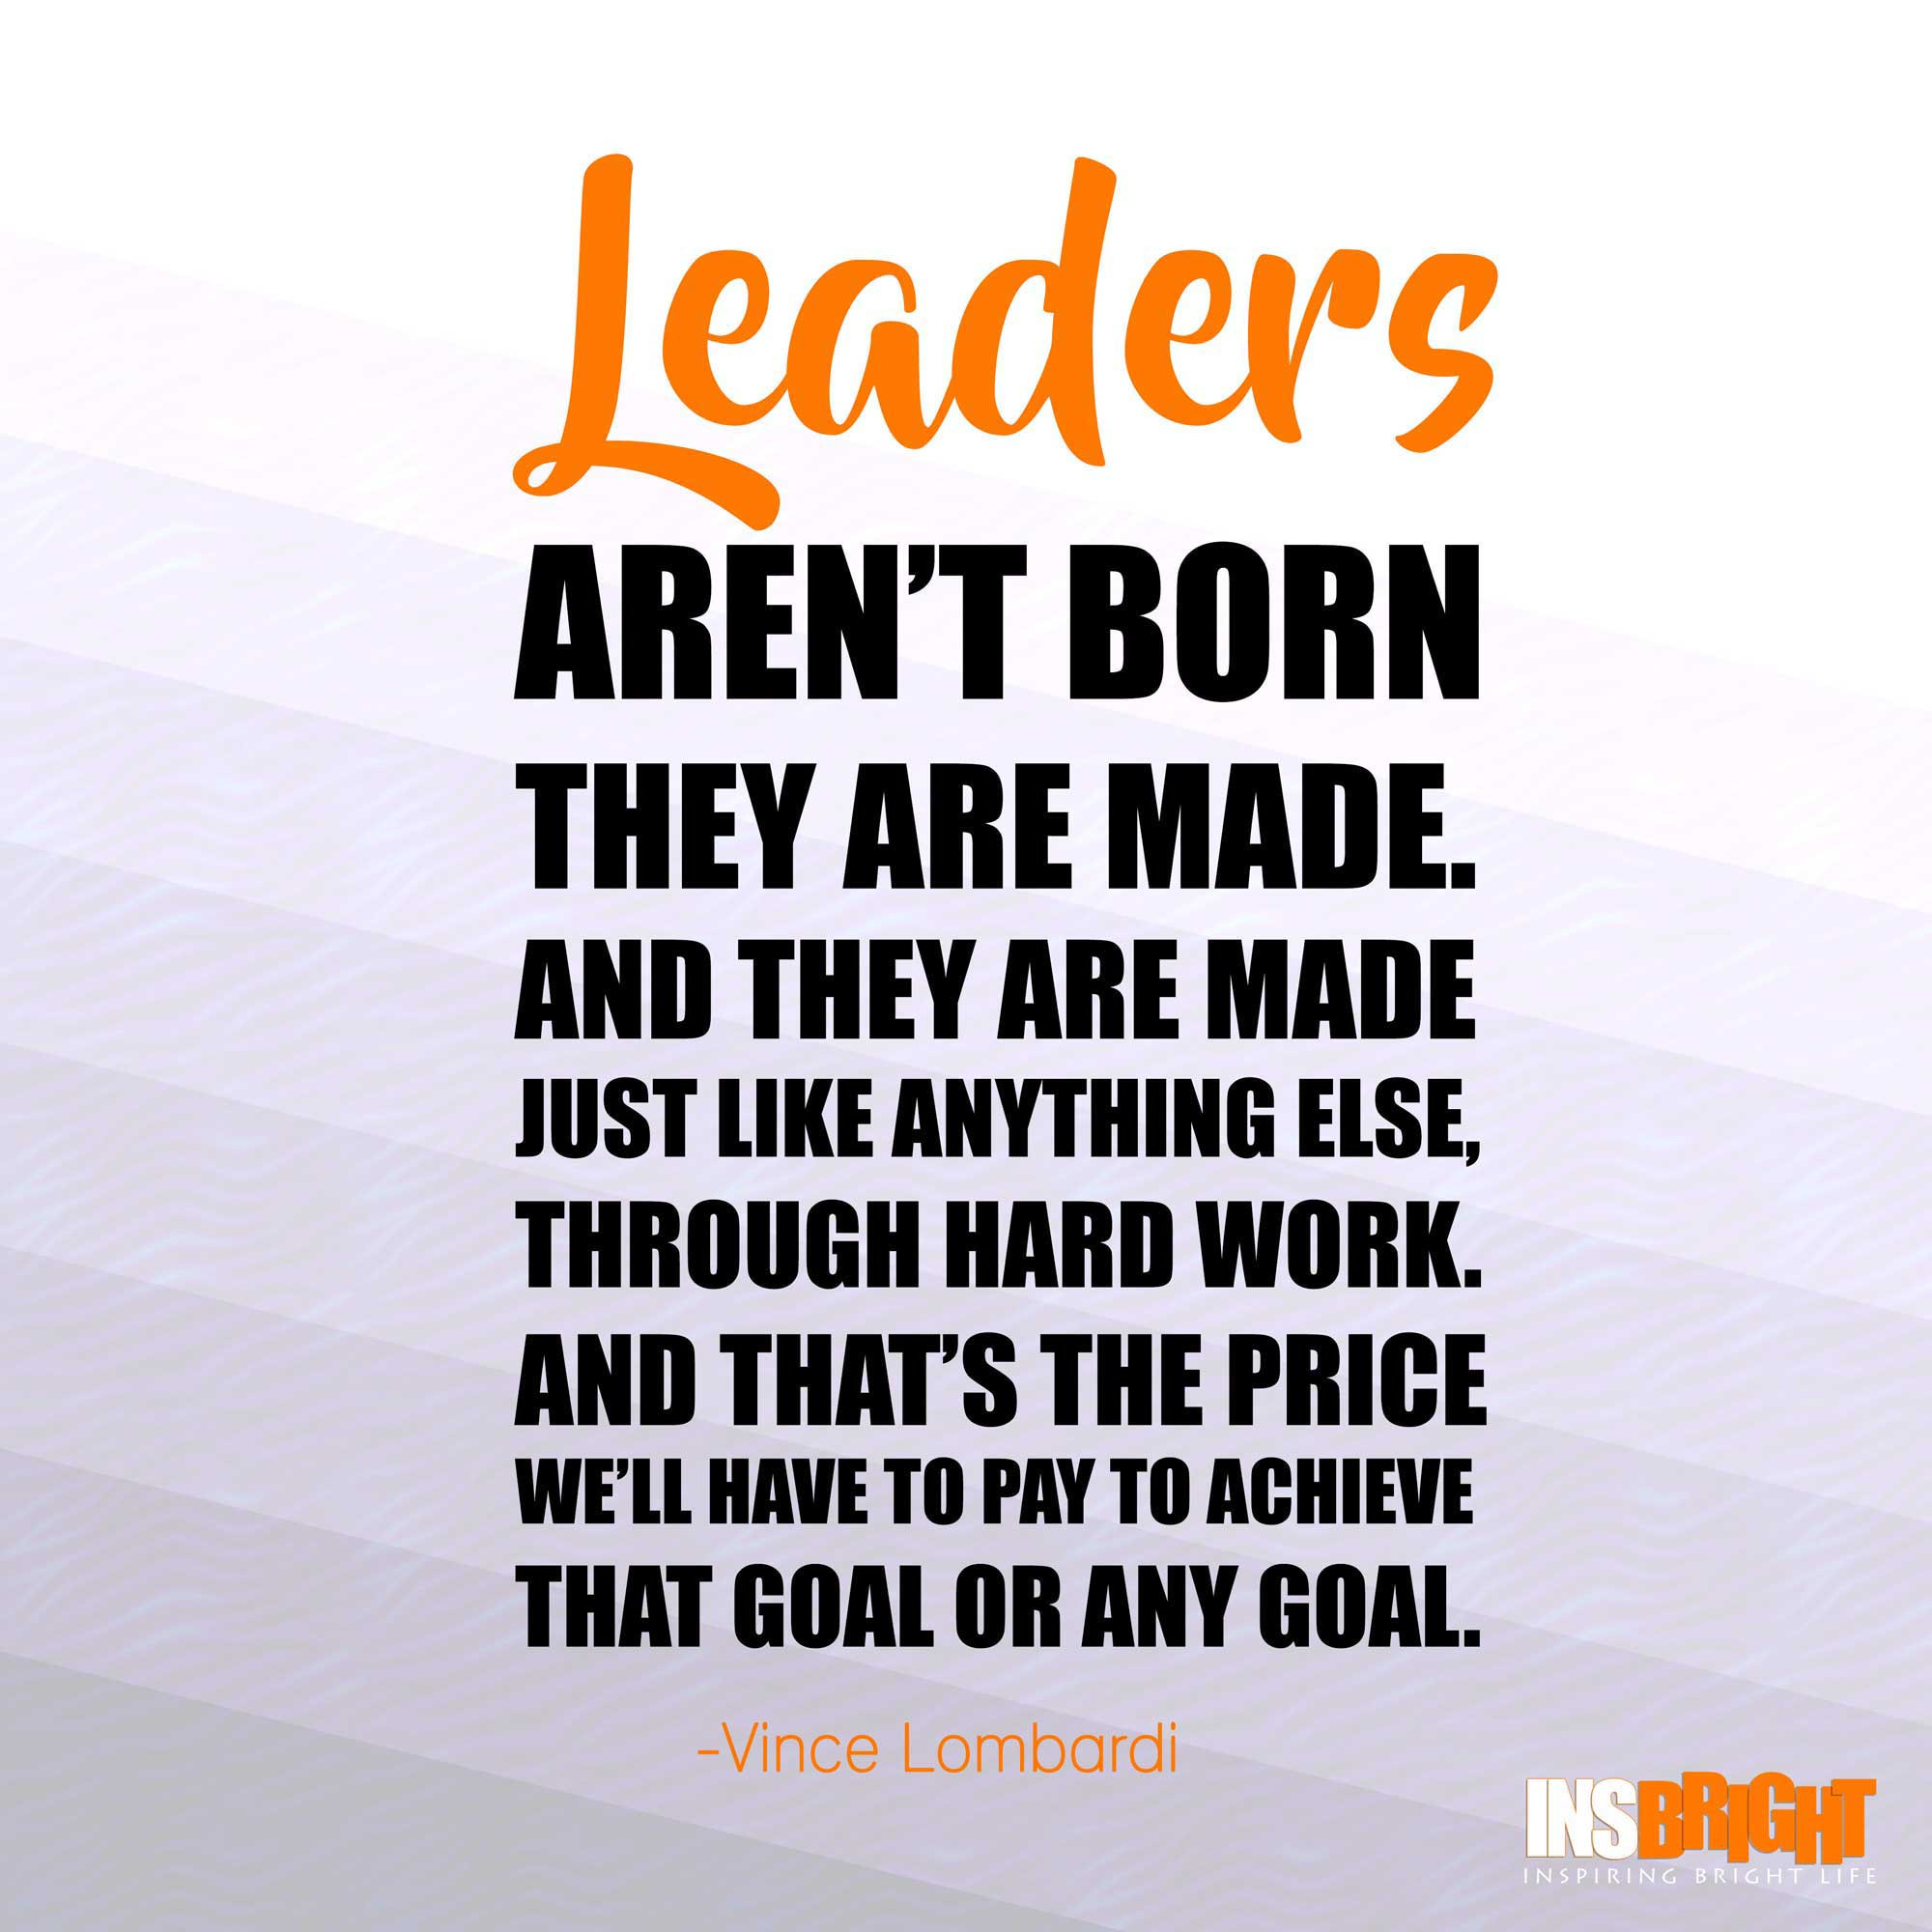 Inspiring Leadership Quote
 20 Leadership Quotes for Kids Students and Teachers